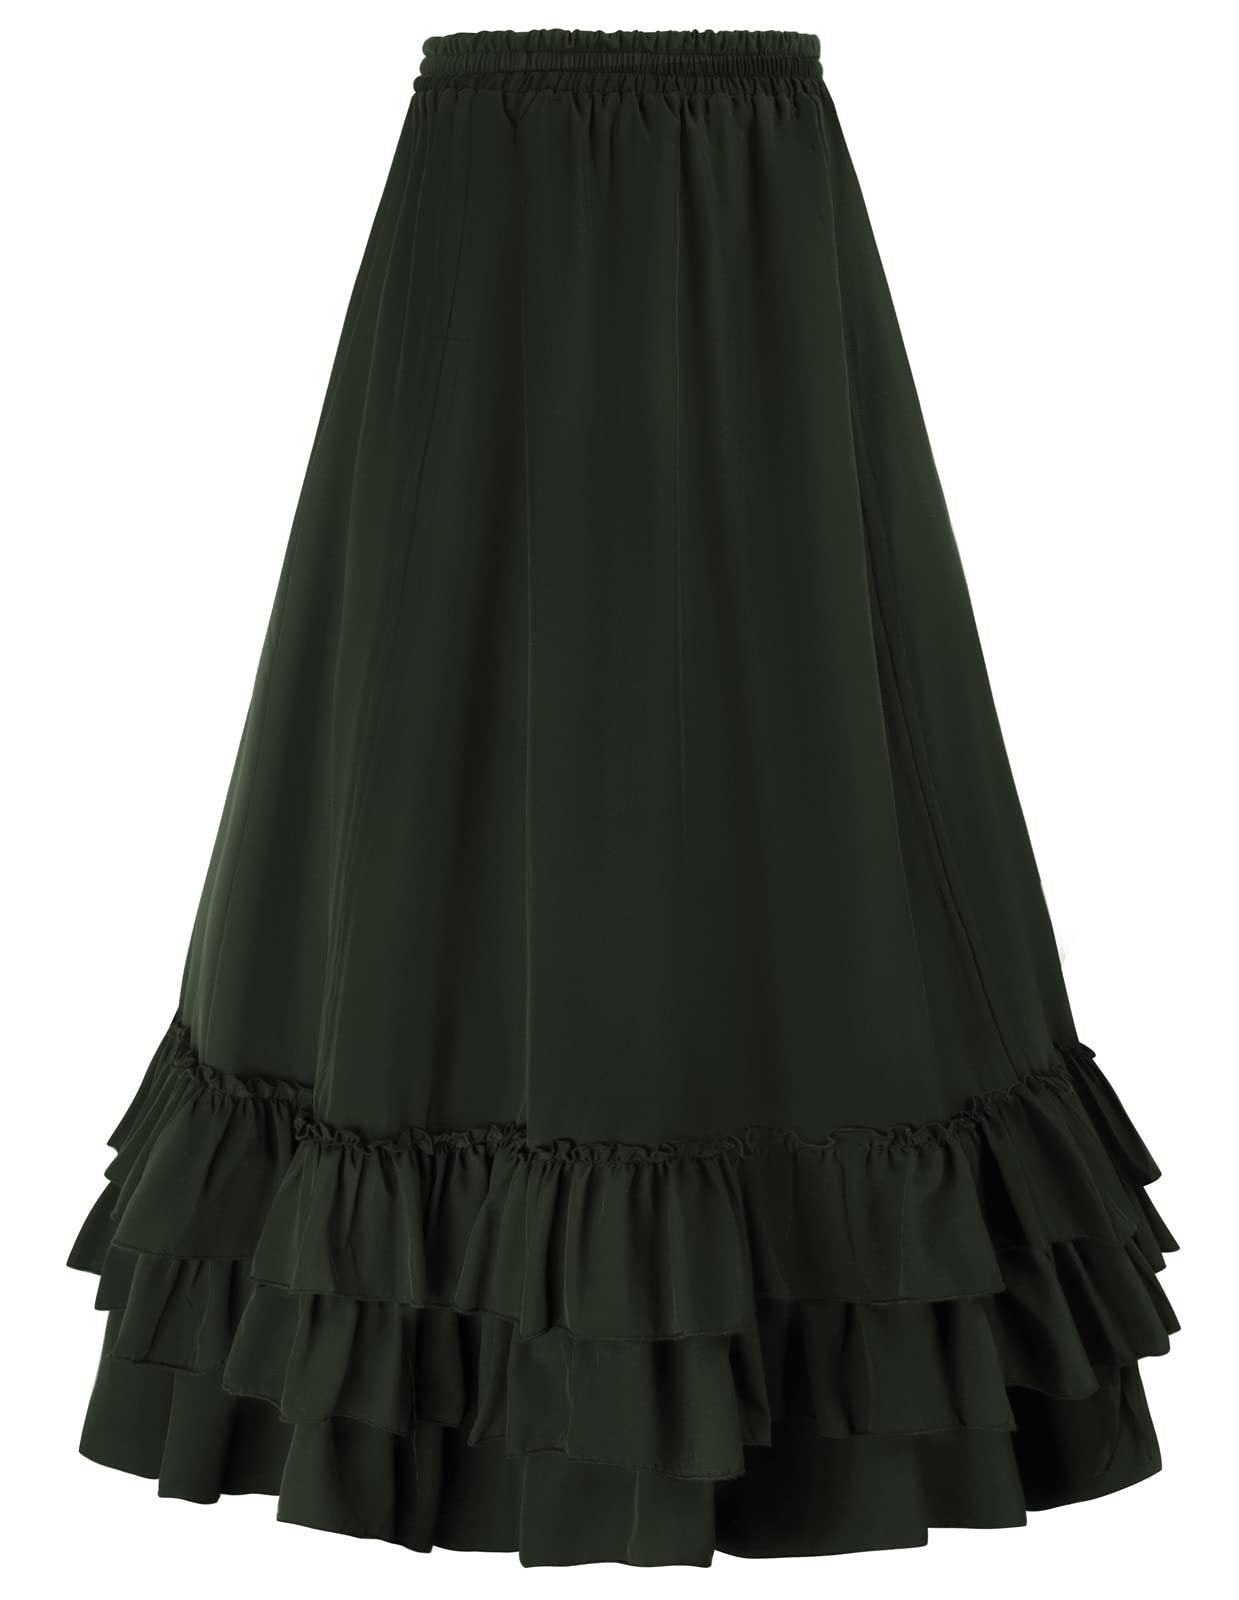 A black, brown and green Women's Vintage Gothic Victorian Skirt from Maramalive™ with ruffles.